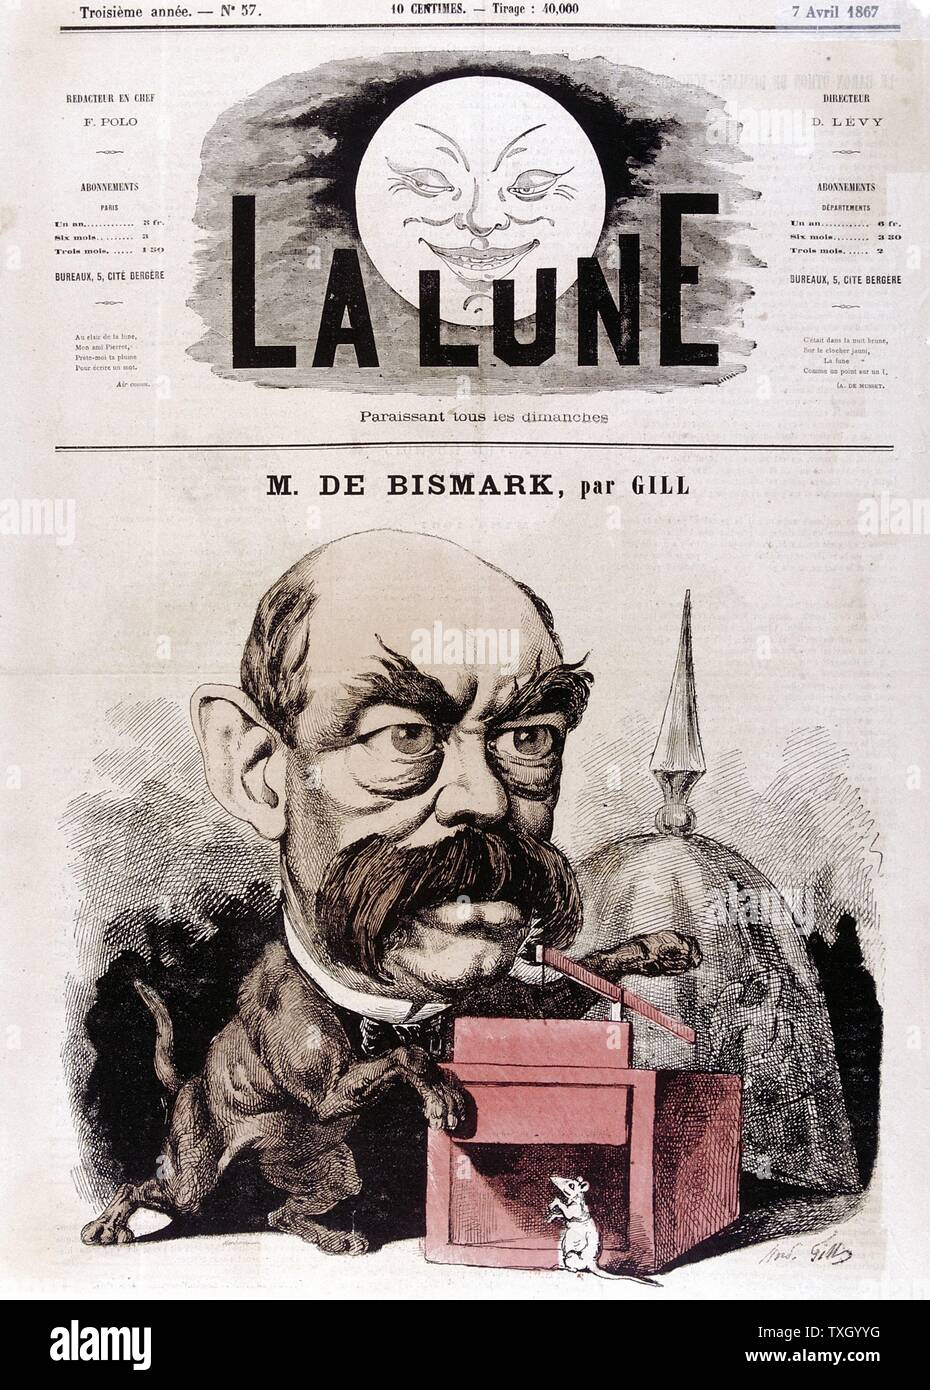 Otto von Bismarck (1815-1904) Prussian (German) statesman. Chancellor of new German empire 1866-90. Gill cartoon published in 'La Lune' Paris 1867 showing Bismarck as cat with mousetrap. Coloured engraving Stock Photo